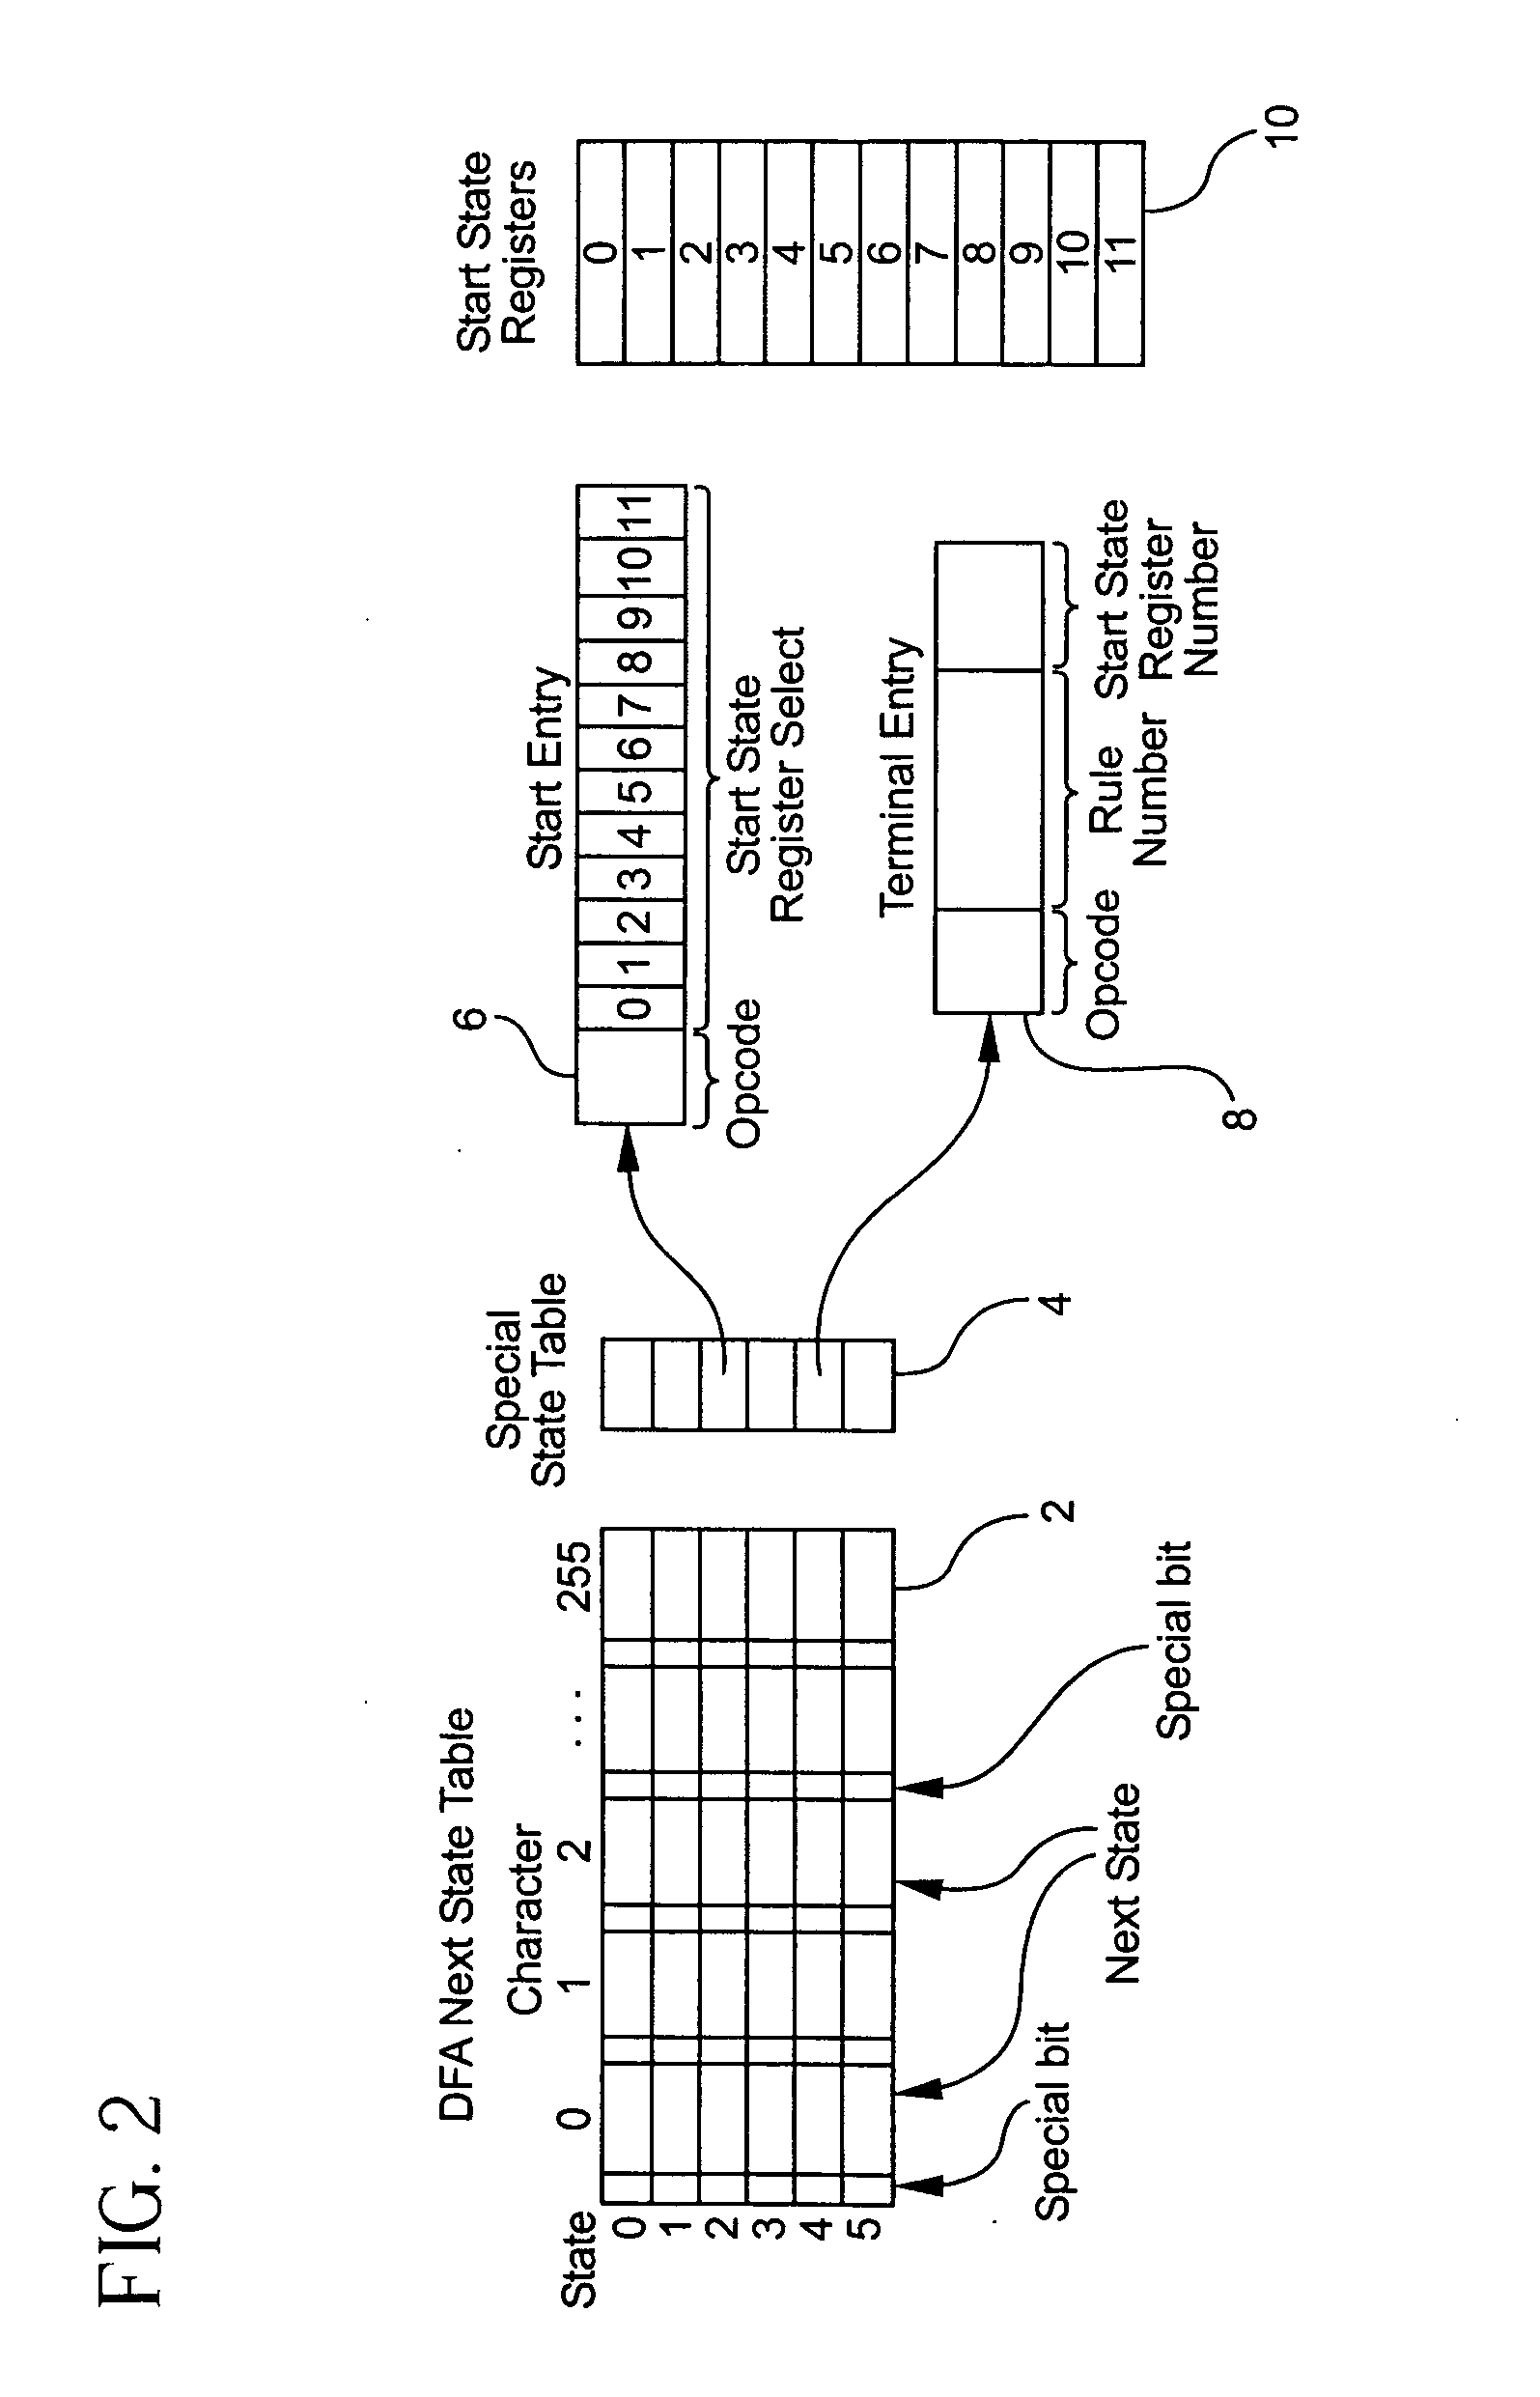 System and method for determining the start of a match of a regular expression